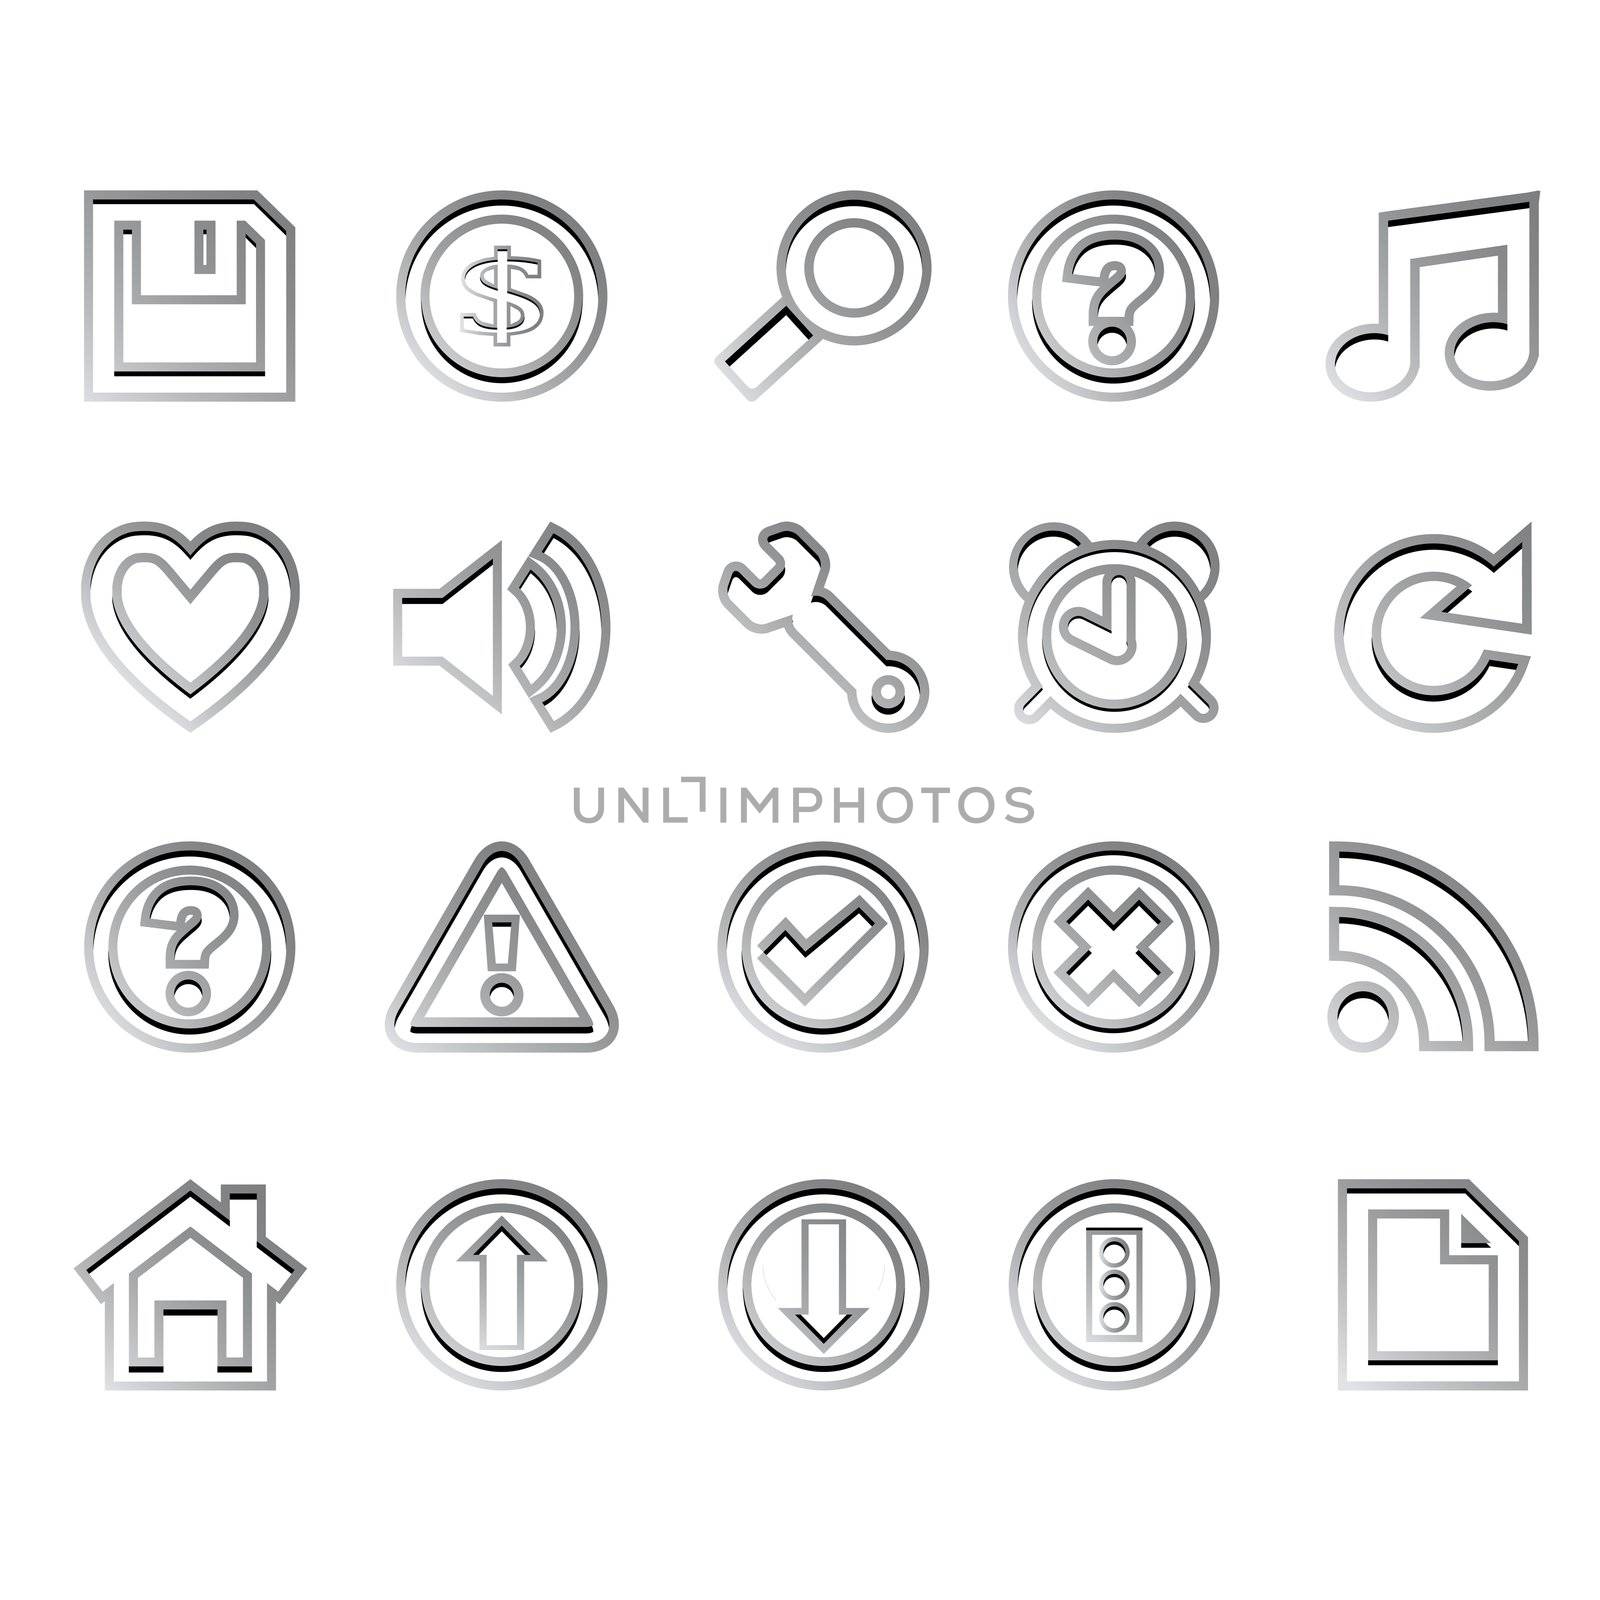 web icons ready for design by robertosch